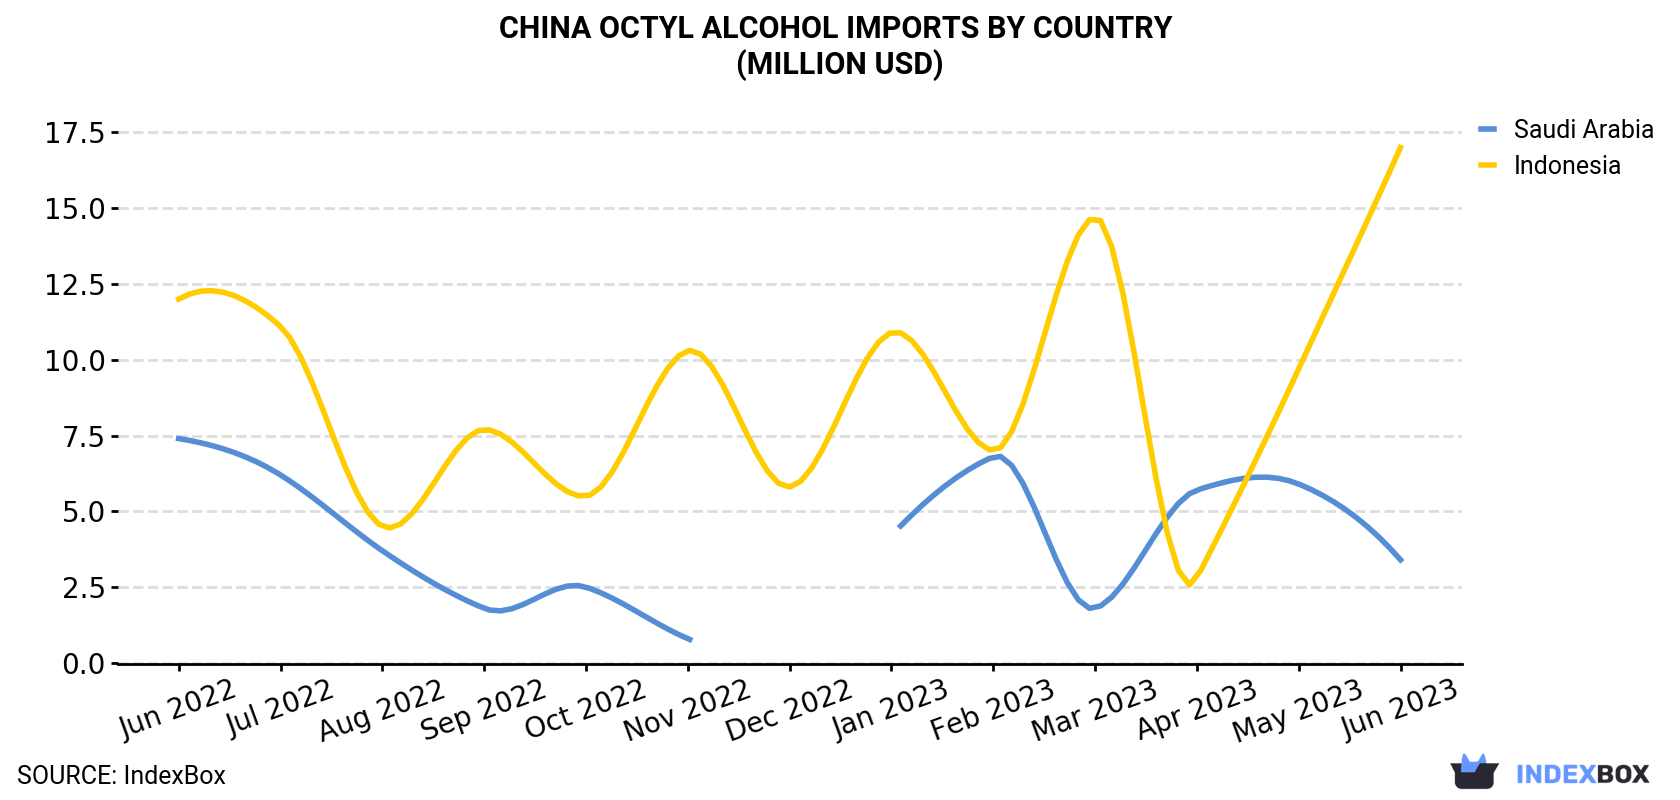 China Octyl Alcohol Imports By Country (Million USD)